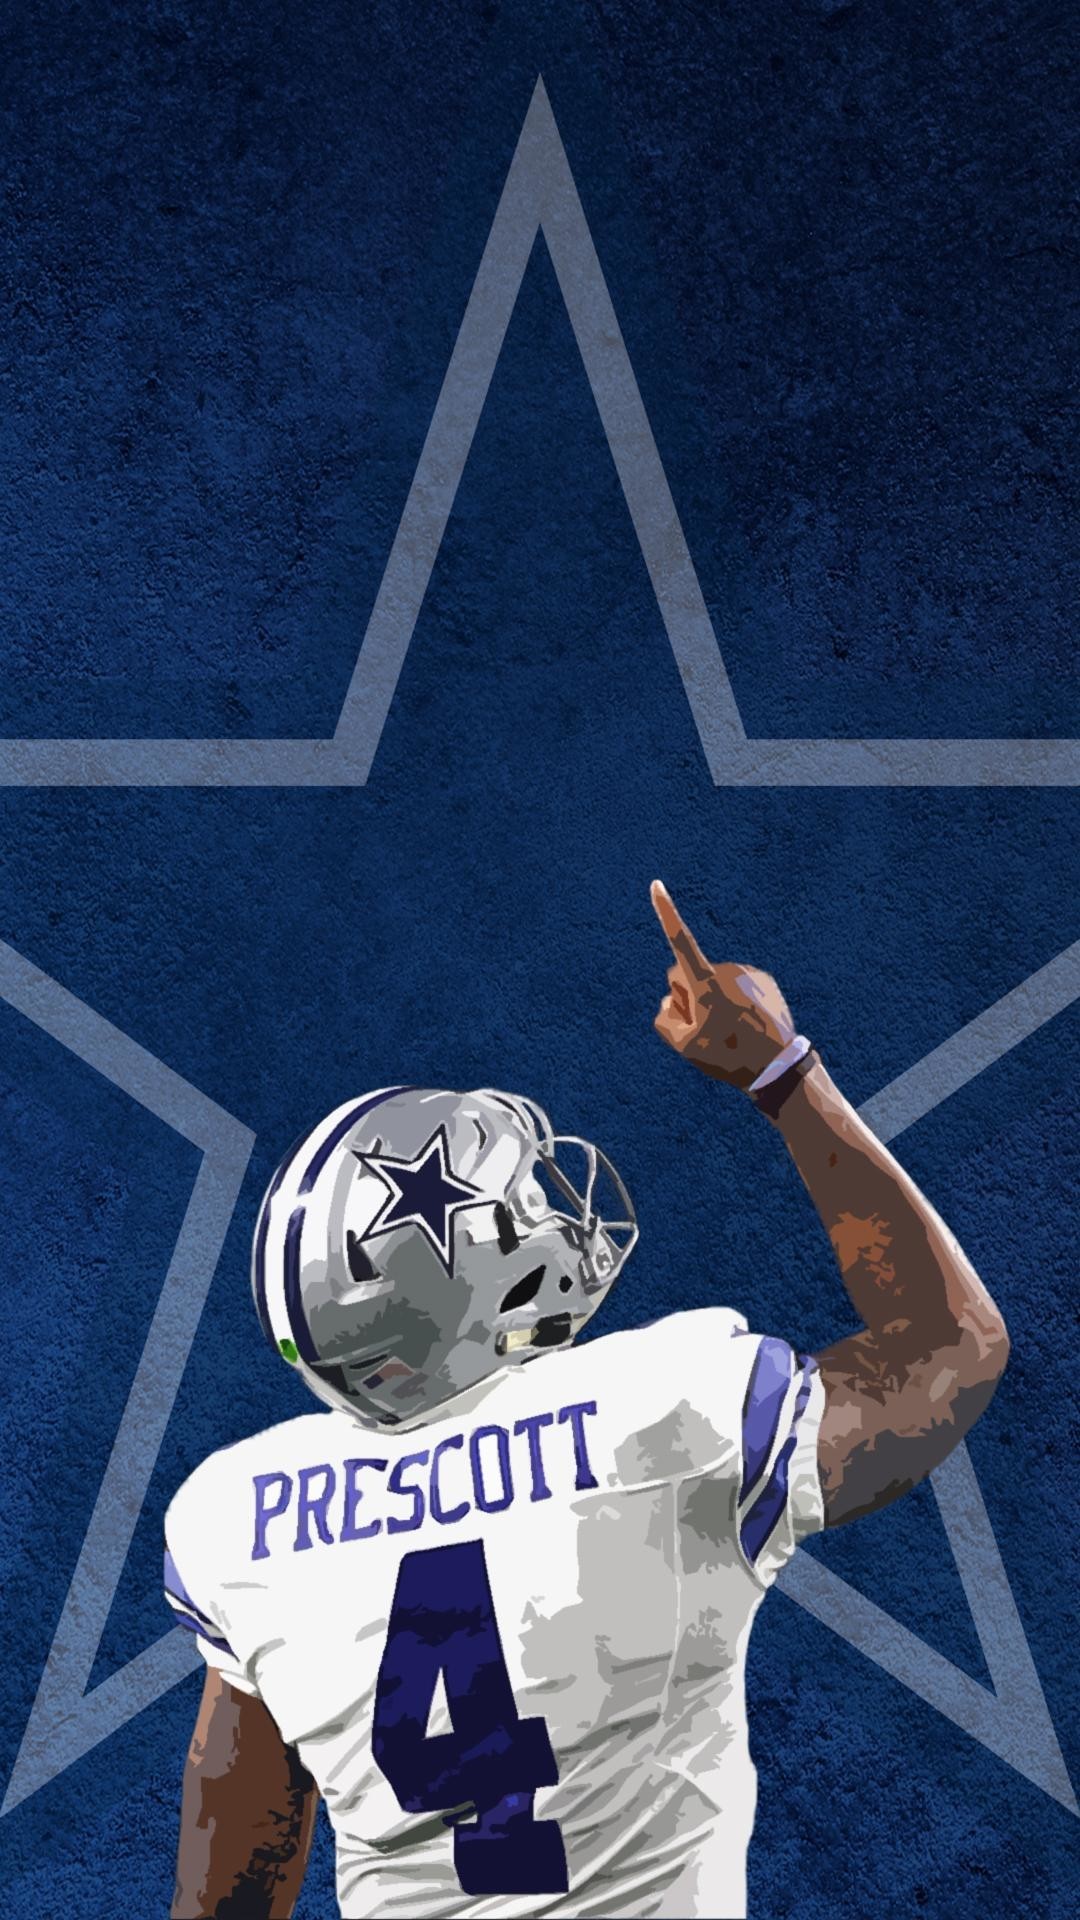 Dallas Cowboys iPhone Screen Lock Wallpaper with high-resolution 1080x1920 pixel. Download and set as wallpaper for Apple iPhone X, XS Max, XR, 8, 7, 6, SE, iPad, Android